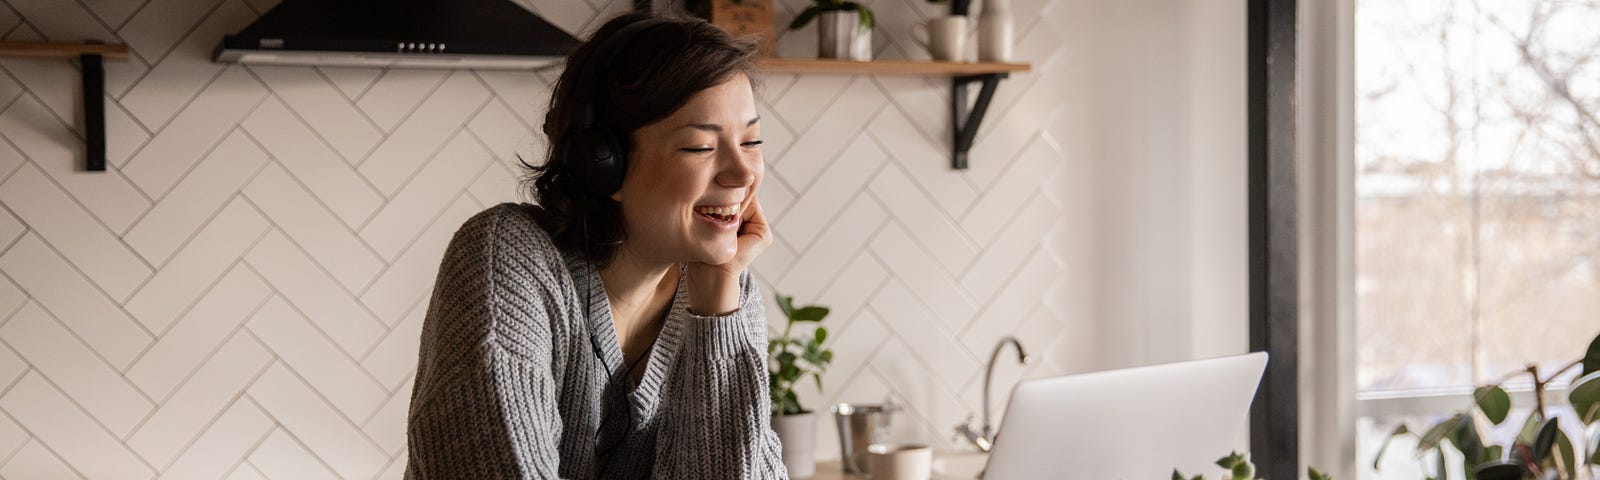 Smiling woman looking at laptop in kitchen